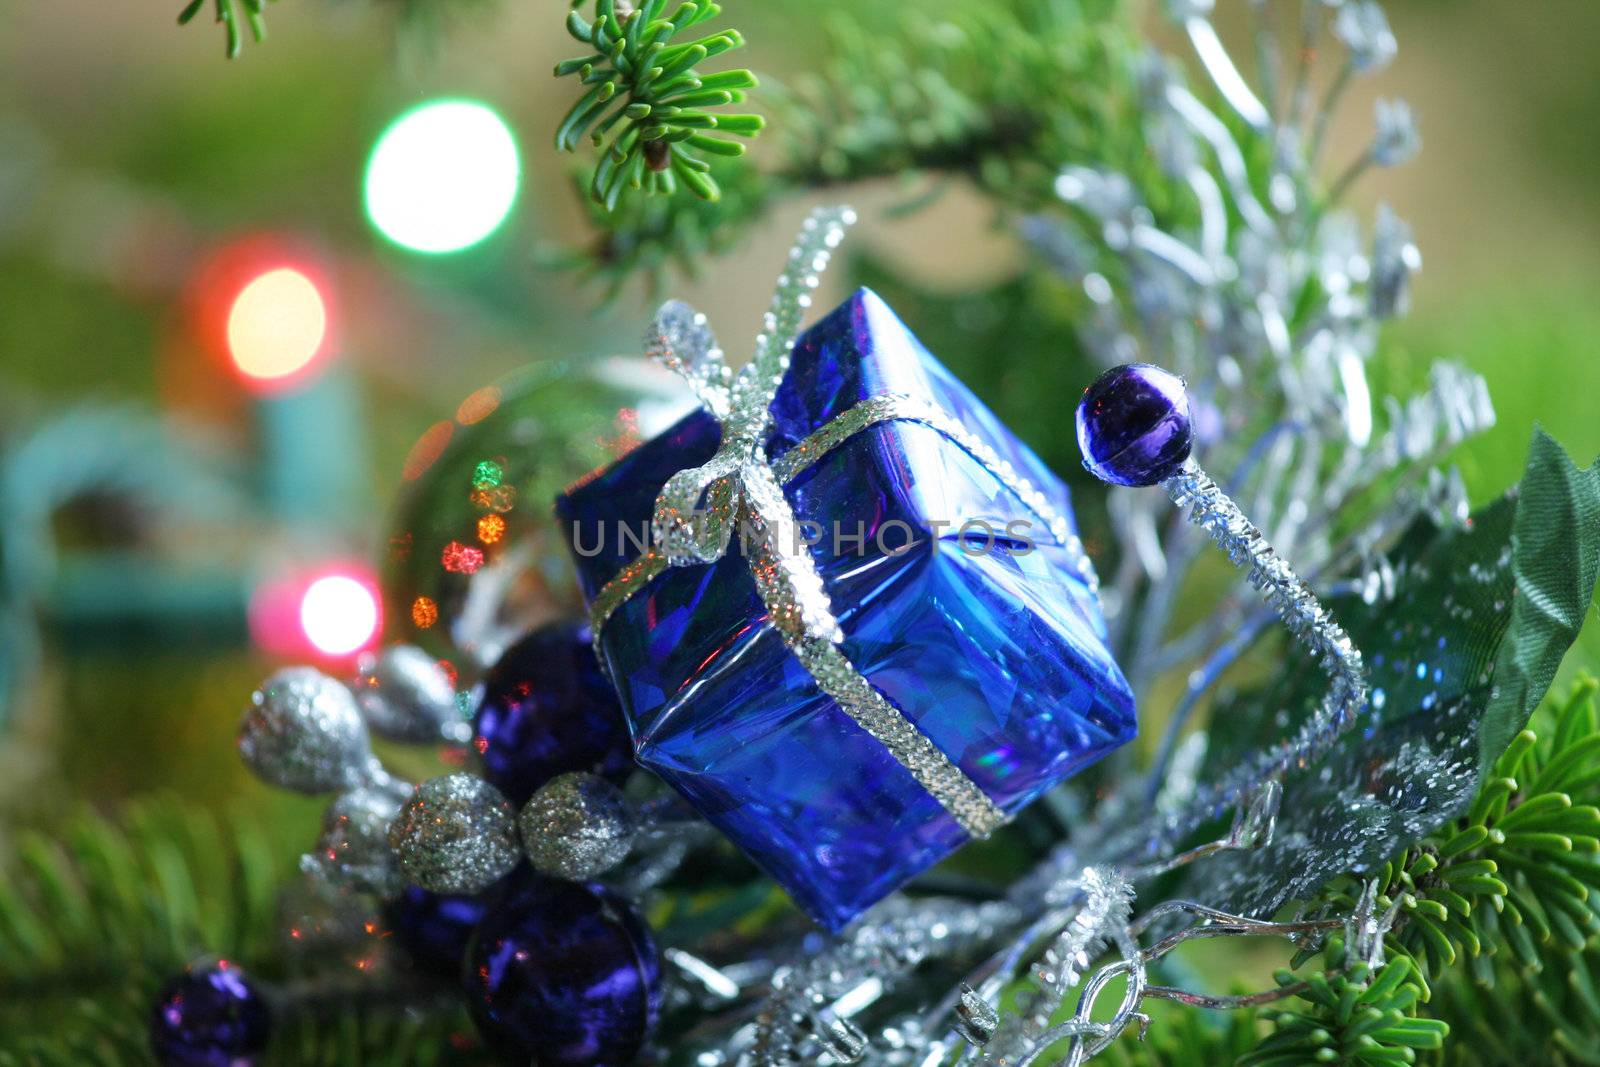 Blue present ornament nestled in CHristmas tree. by jarenwicklund